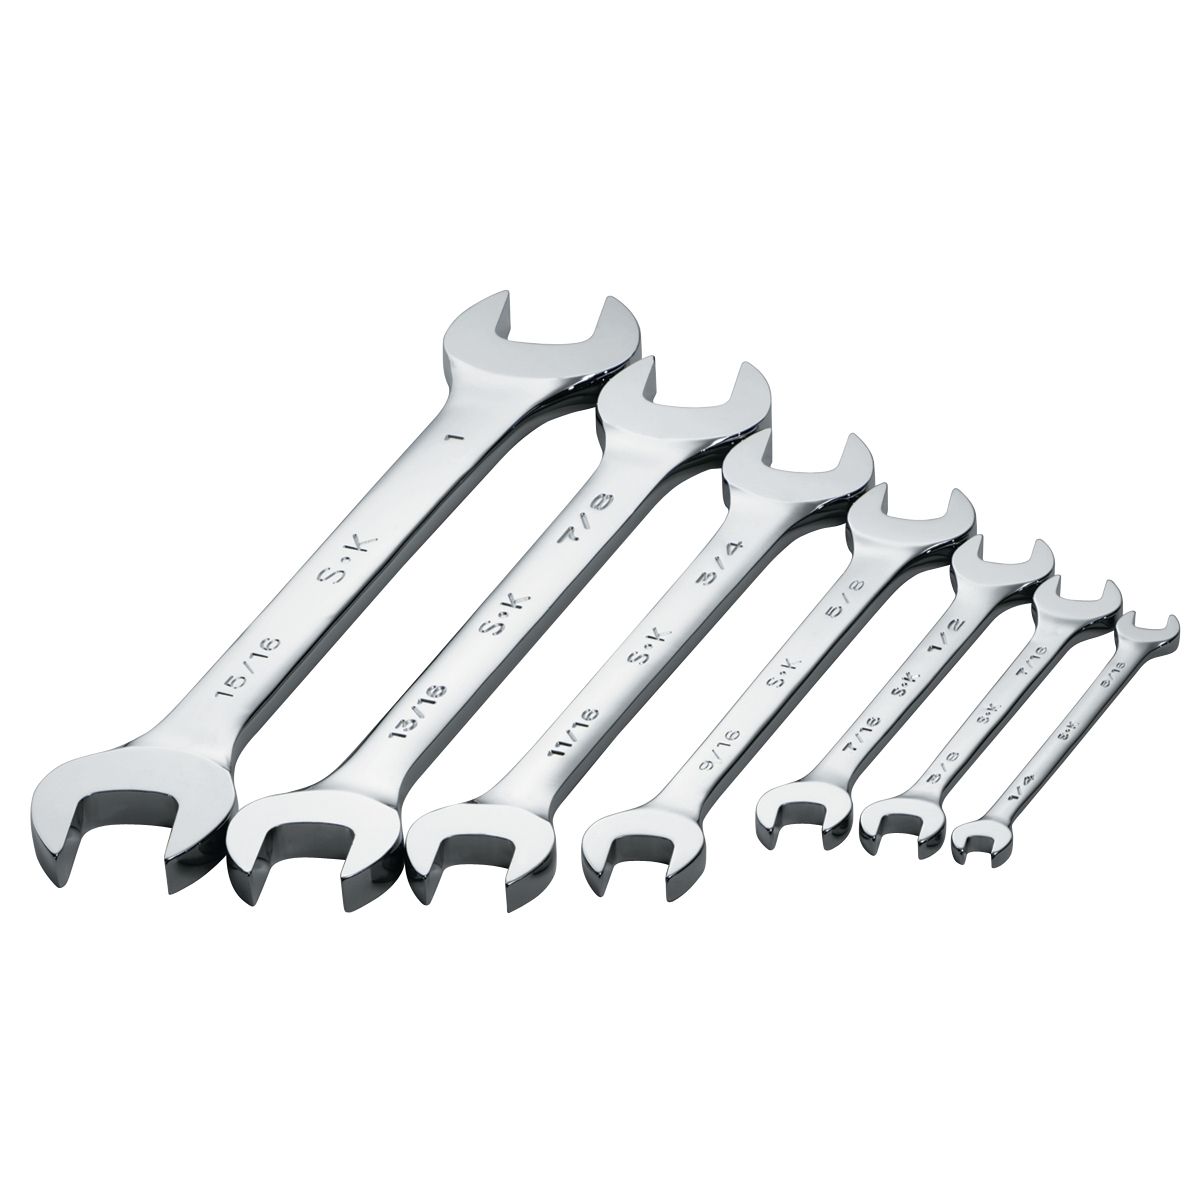 SuperKrome Fractional Open End Wrench Set - 7 Piece